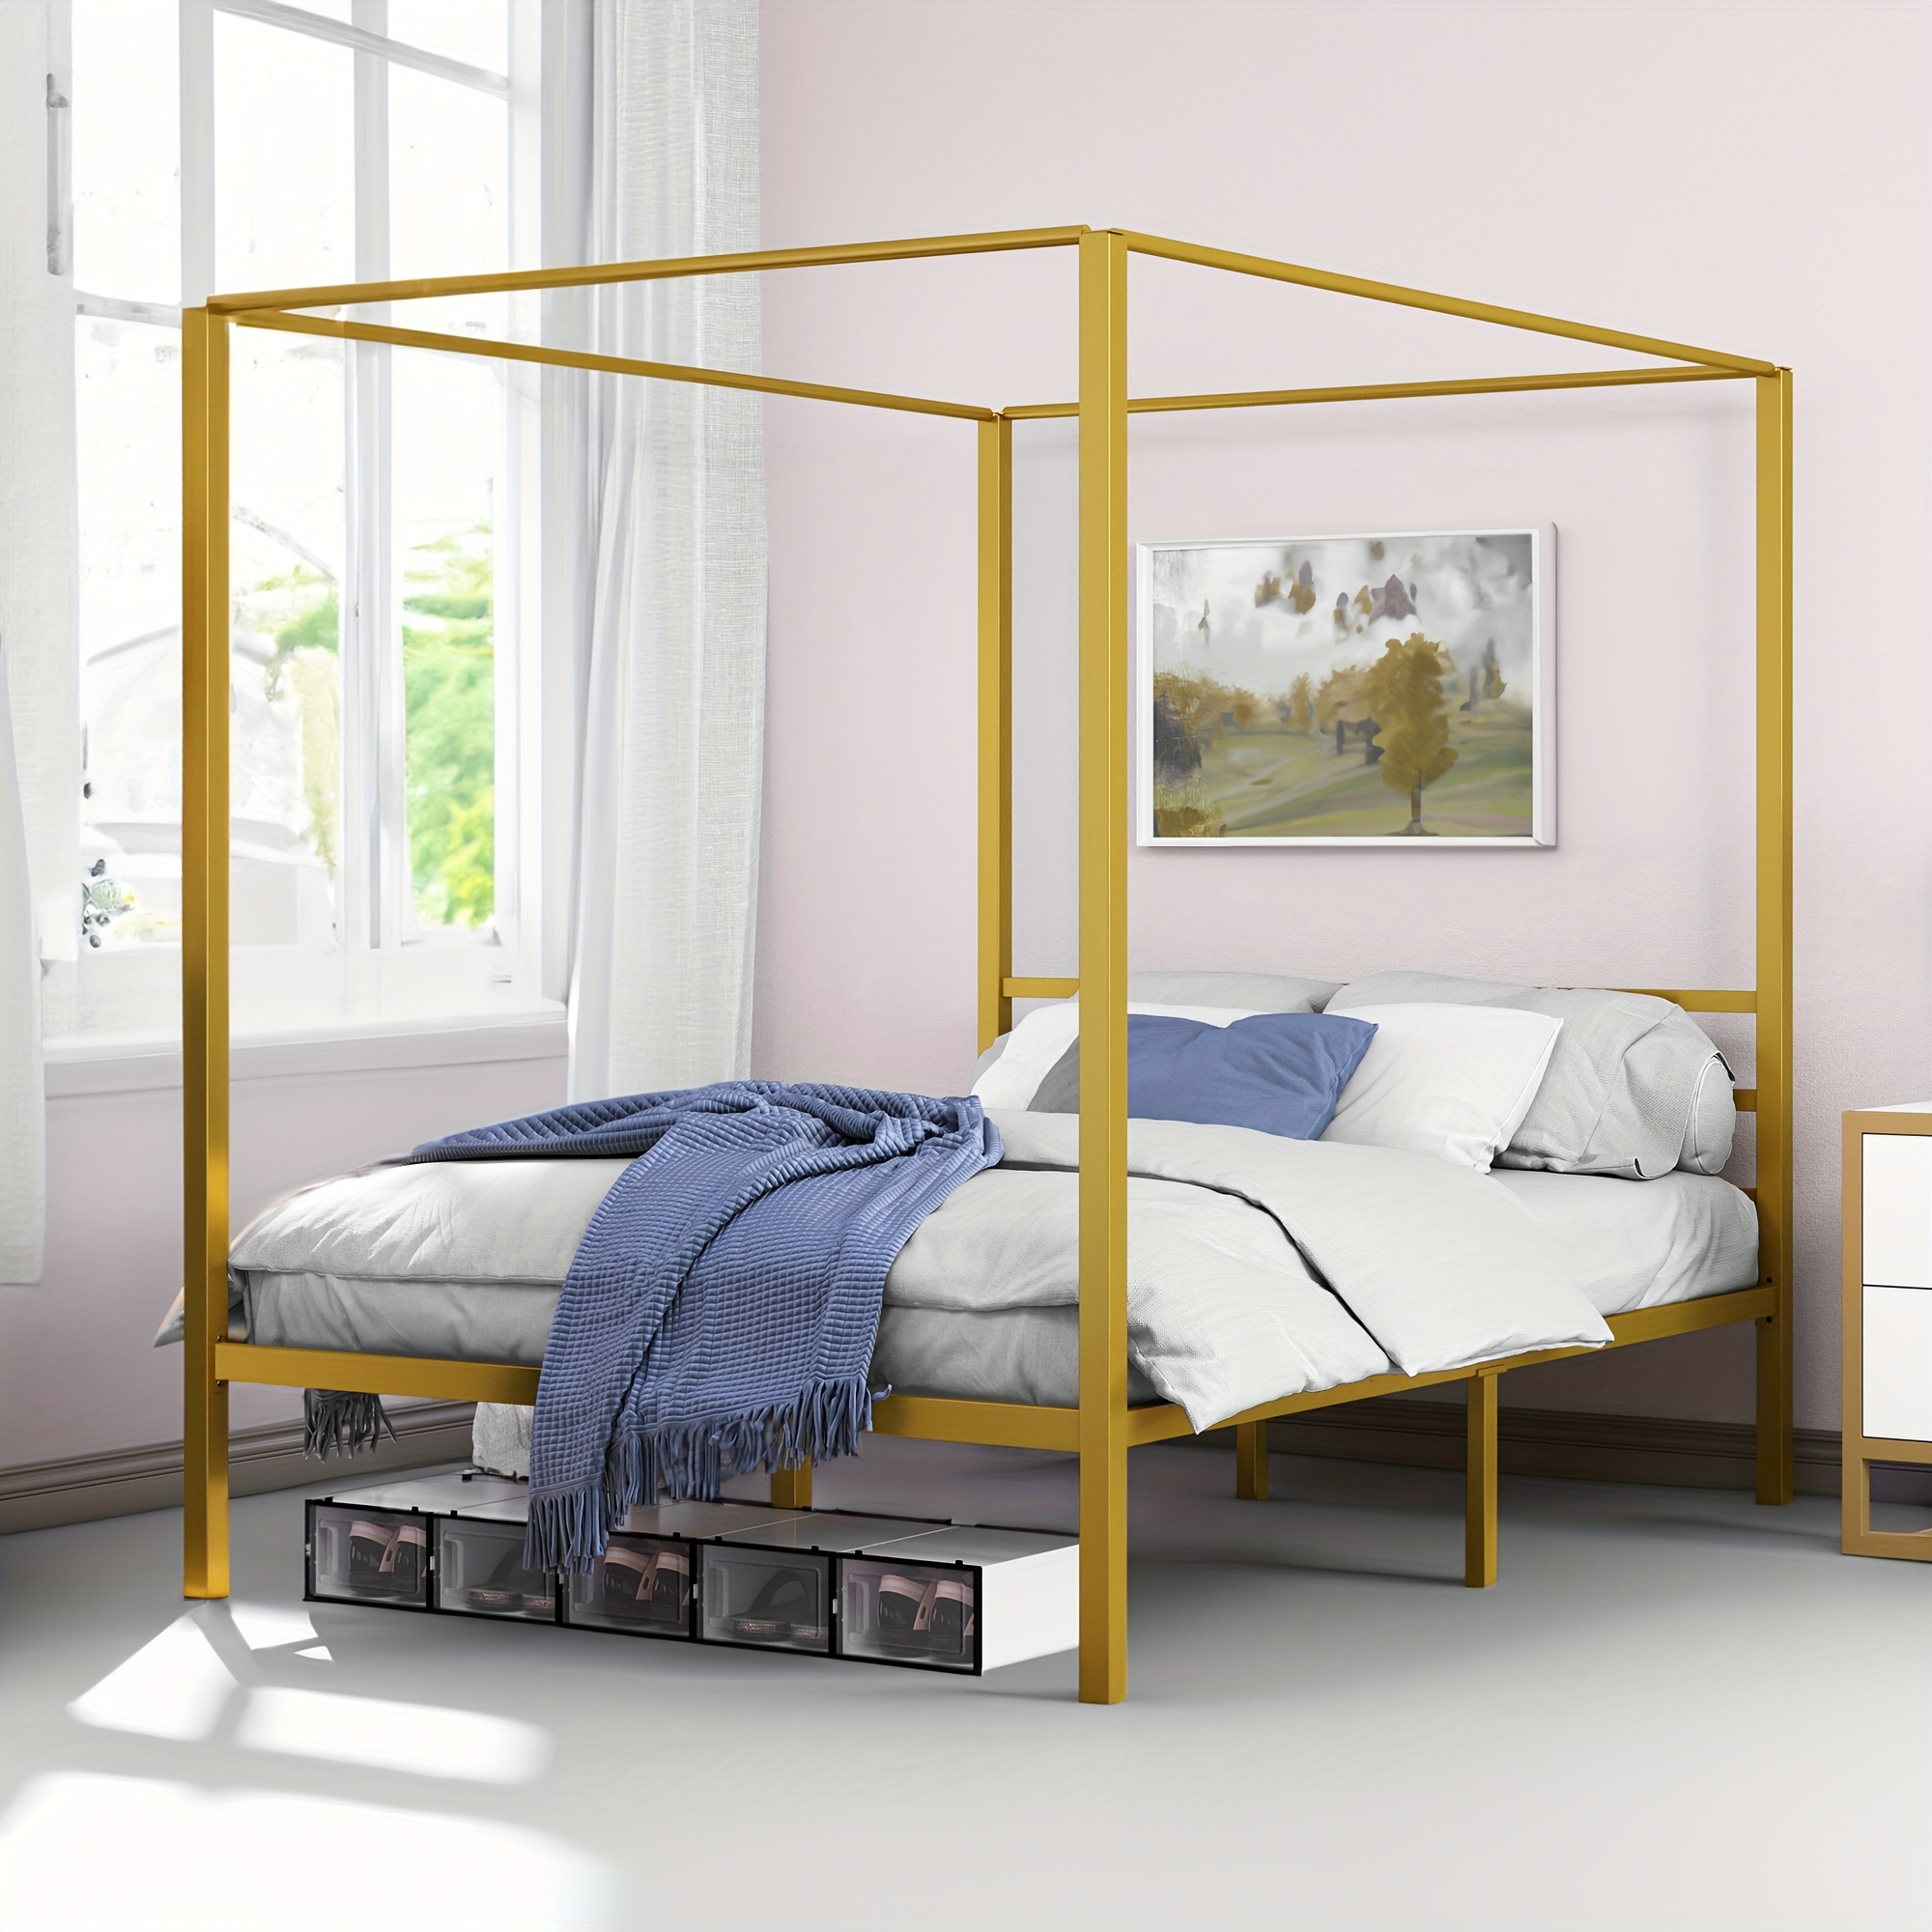 

Quoyad Metal 4 Poster Canopy Bed Frame 14 Inch Platform With Built-in Headboard Strong Metal Slat Mattress Support, No Box Spring Needed, Gold, Queen Size